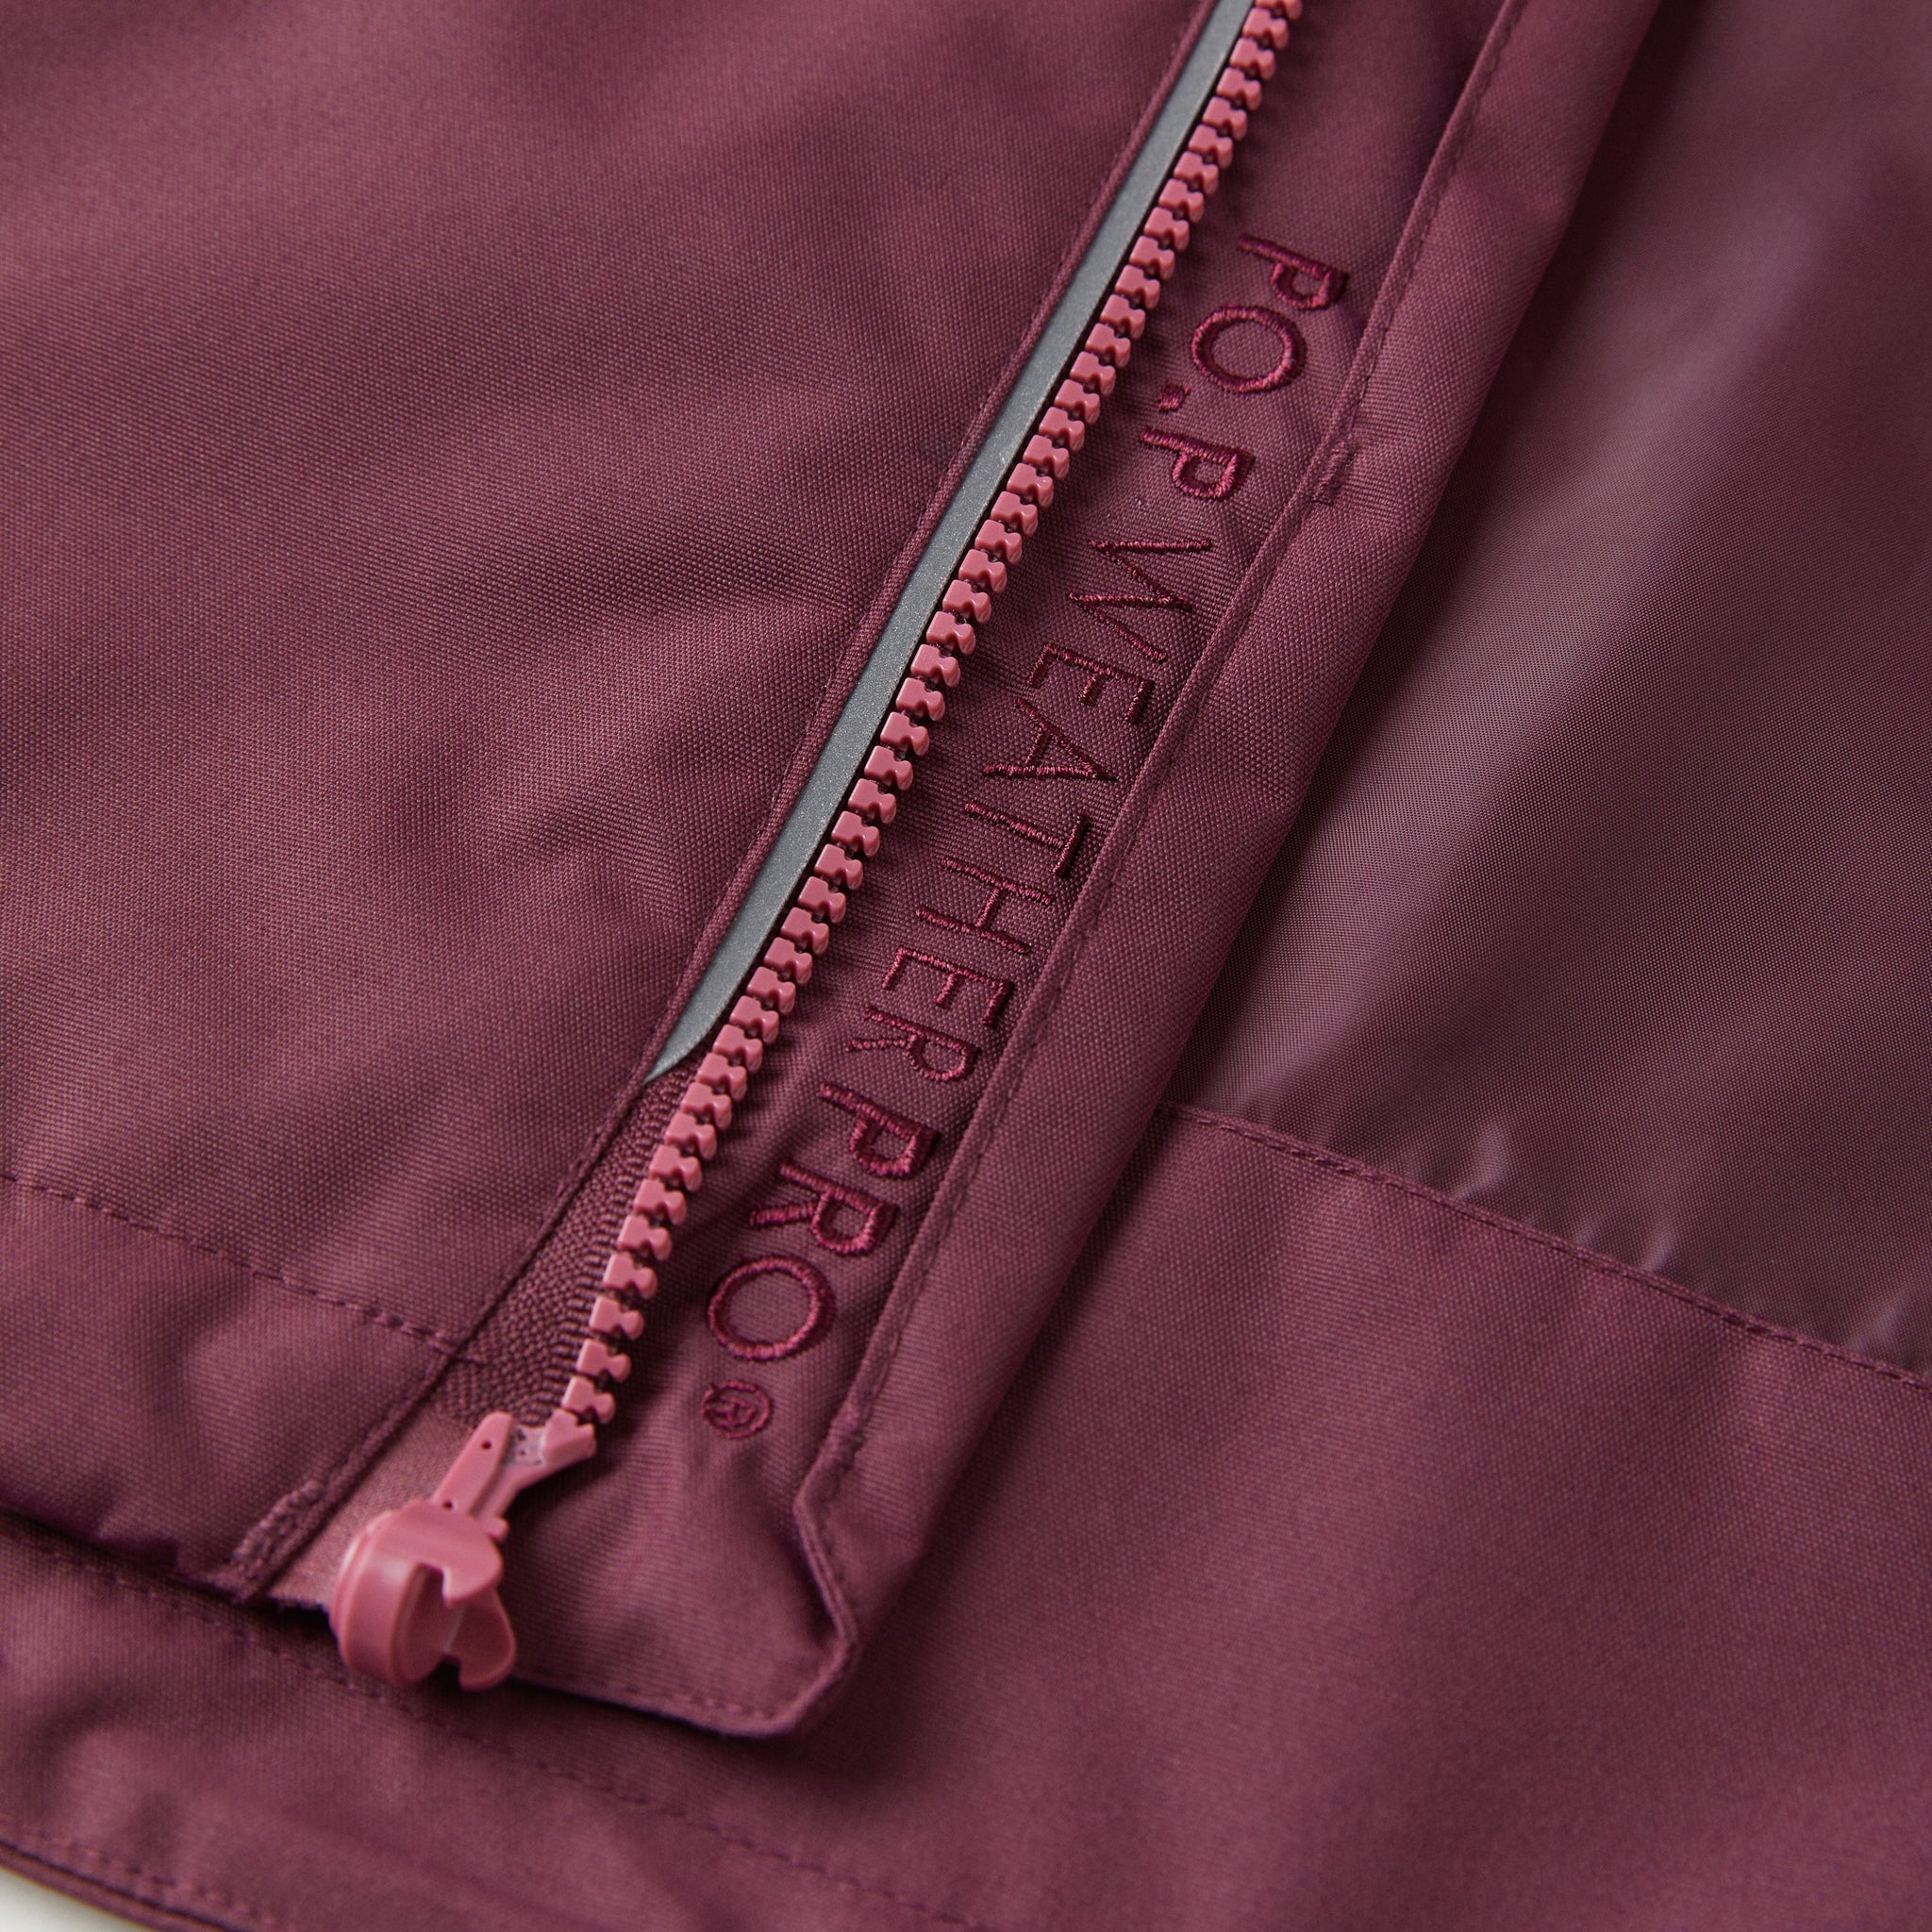 Burgundy Waterproof Kids Jacket from the Polarn O. Pyret kidswear collection. Sustainably produced kids outerwear.